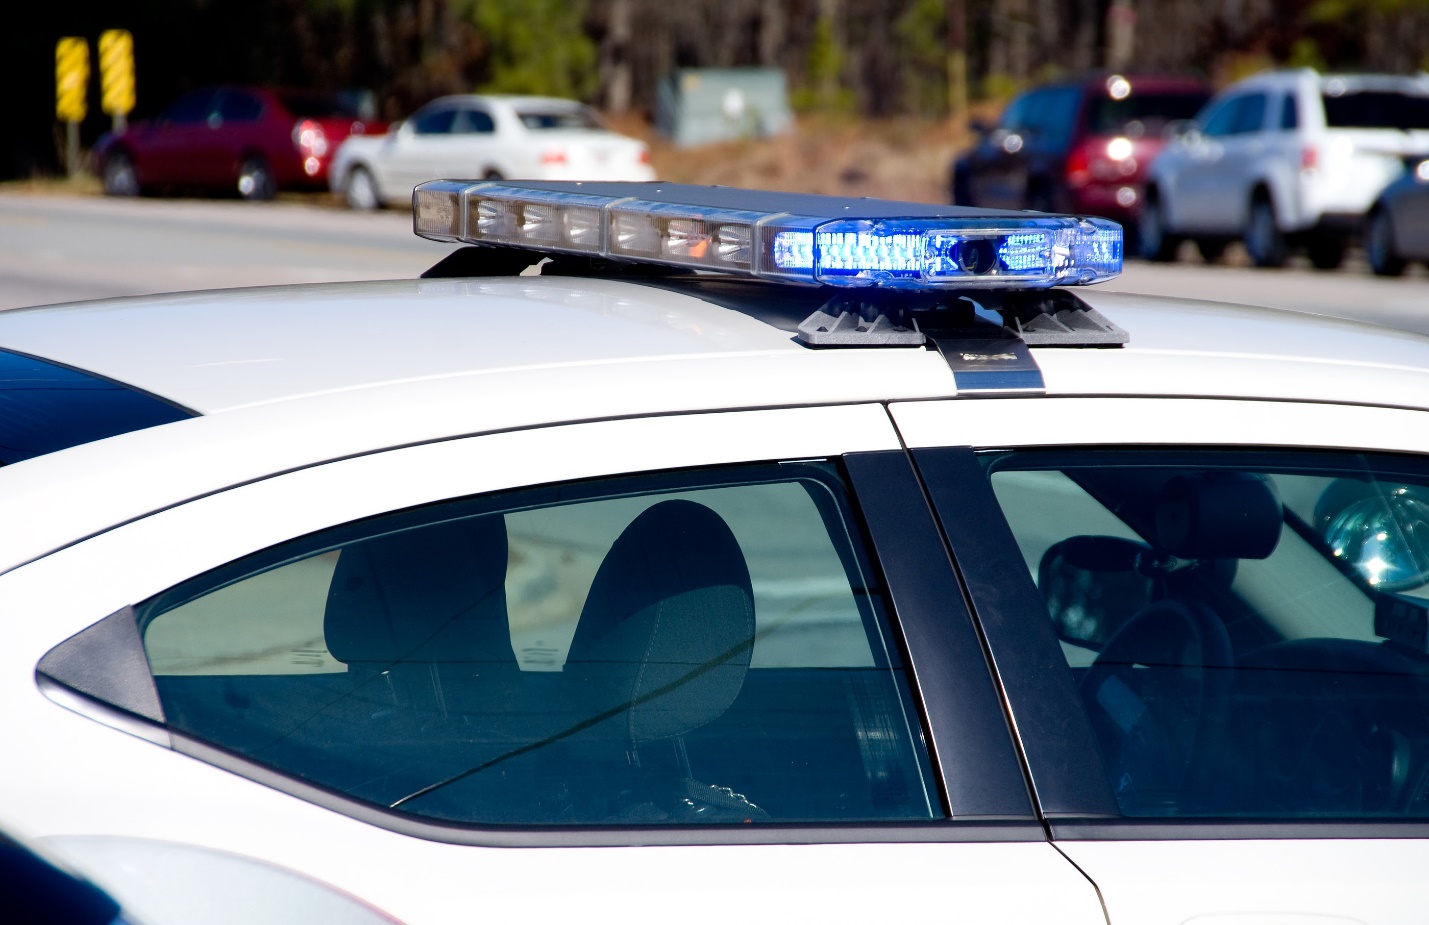 arkansas car accident police reports - How to Report a Car Accident in Arkansas